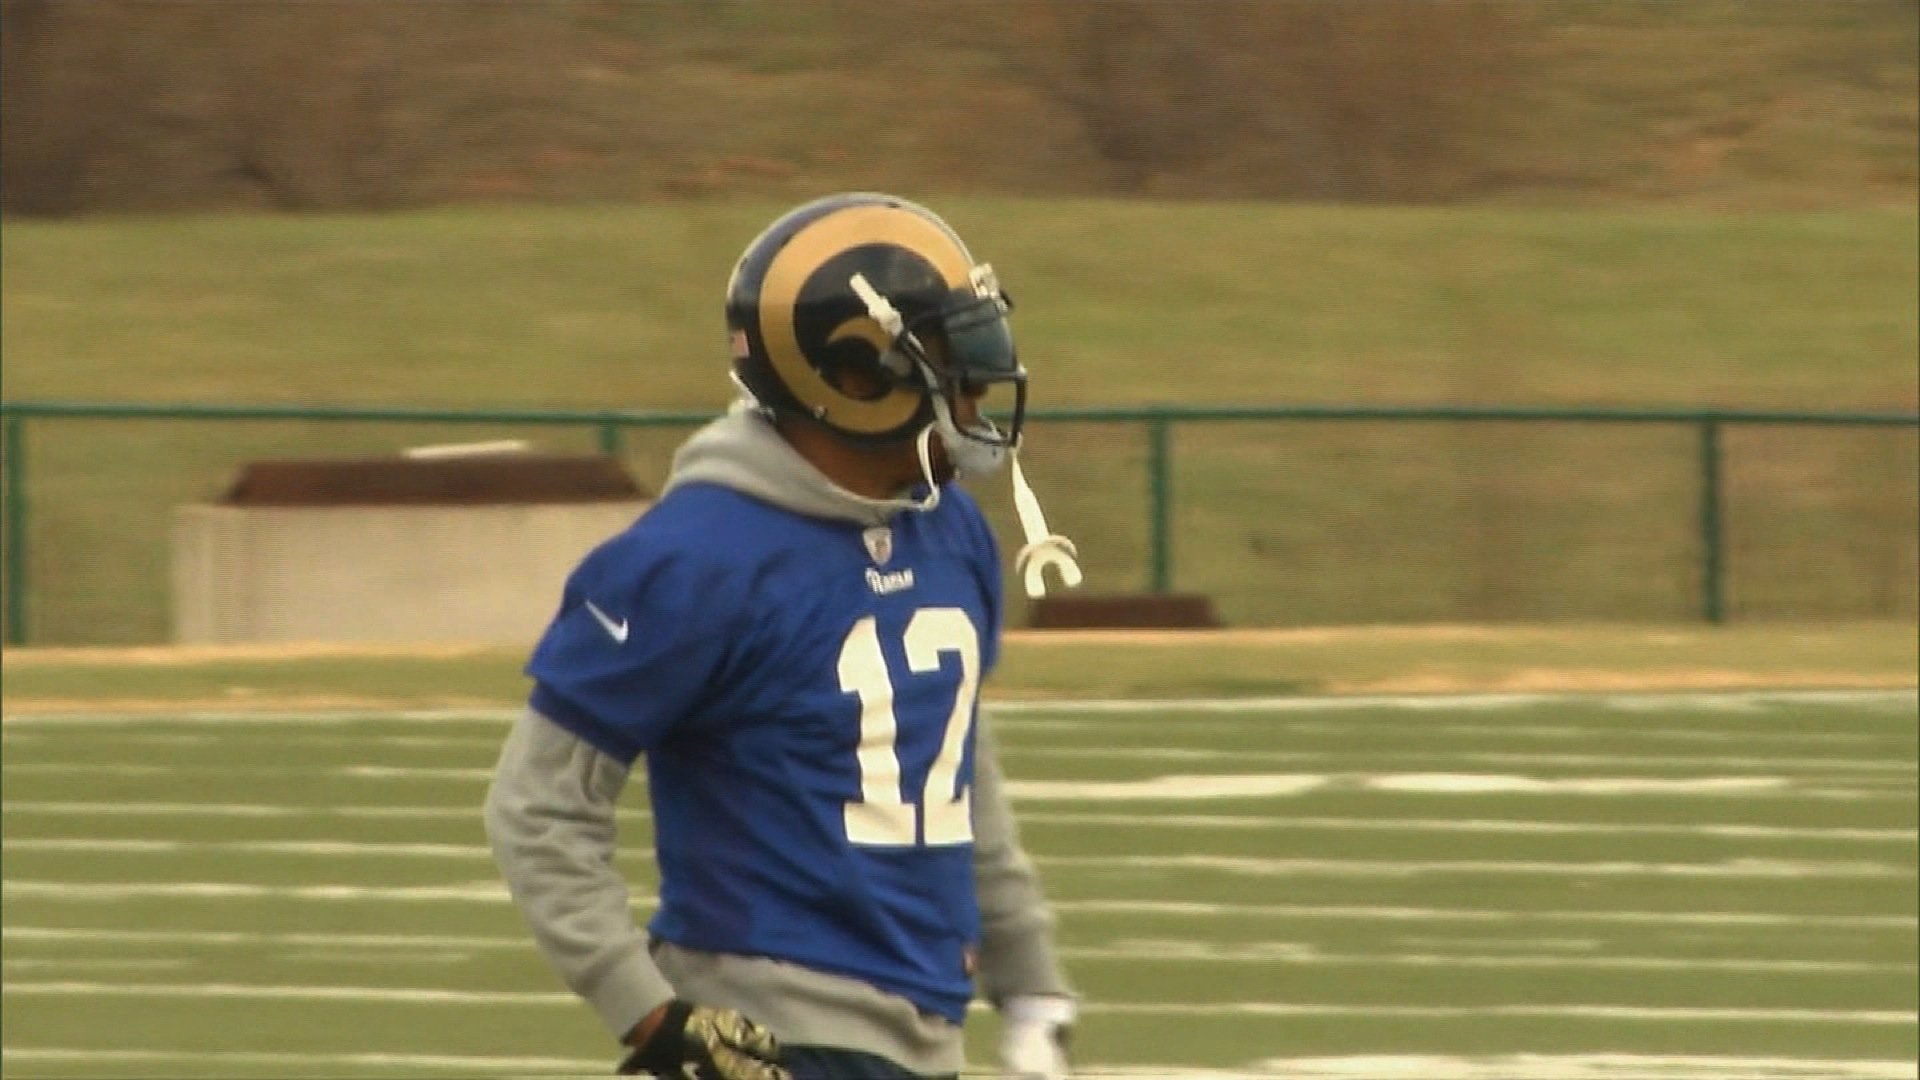 St. Louis Rams wide receiver Stedman Bailey was hospitalized in critical but stable condition Wednesday after an incident the night before, the Rams said. The team did not say what happened to Bailey.